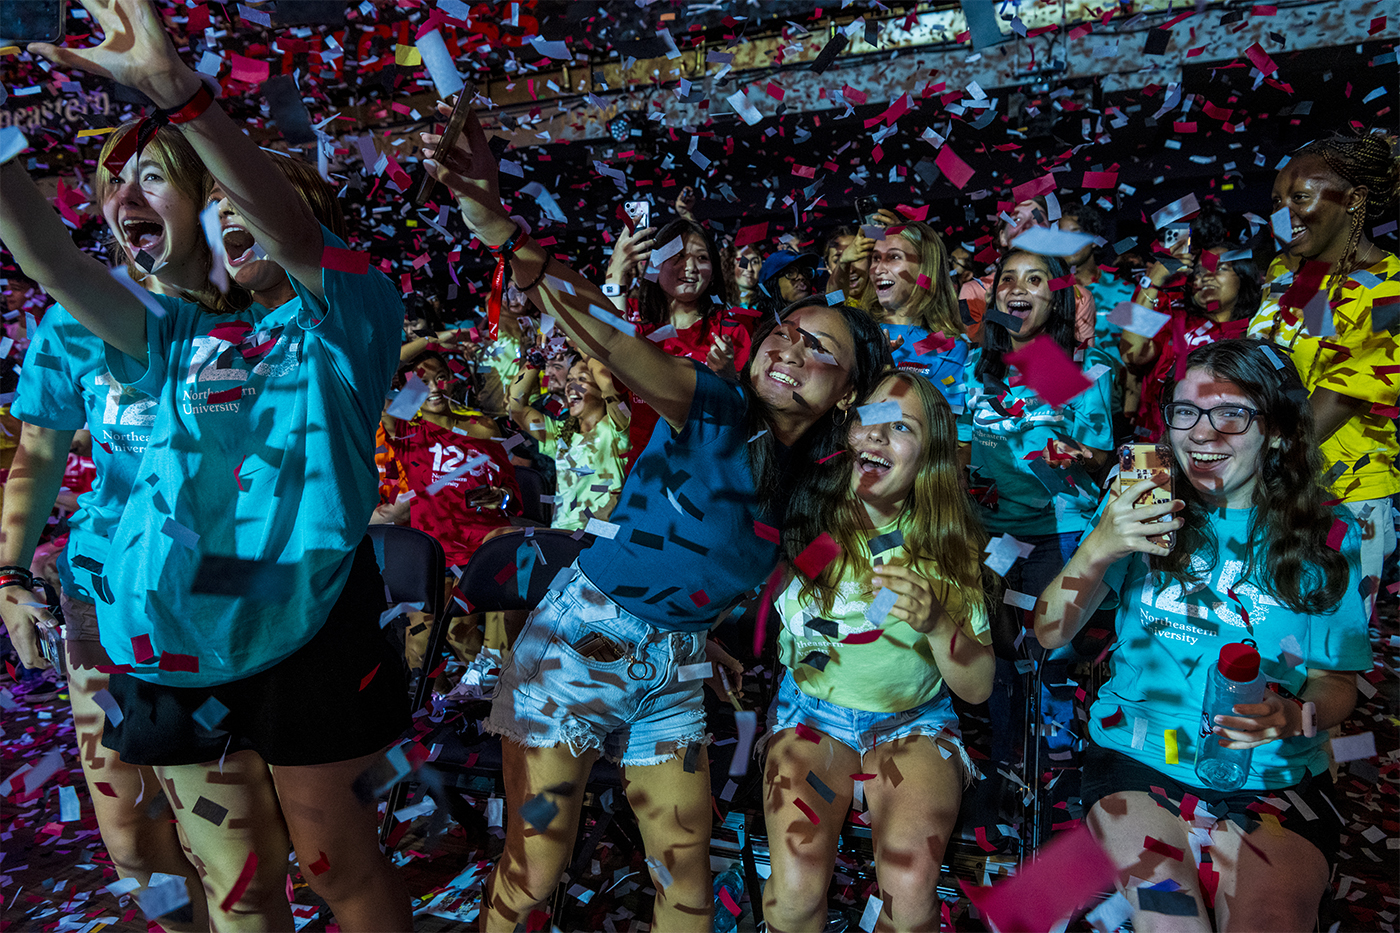 A crowd of students in Class 125 T-shirts cheer and take photos while confetti falls around them.